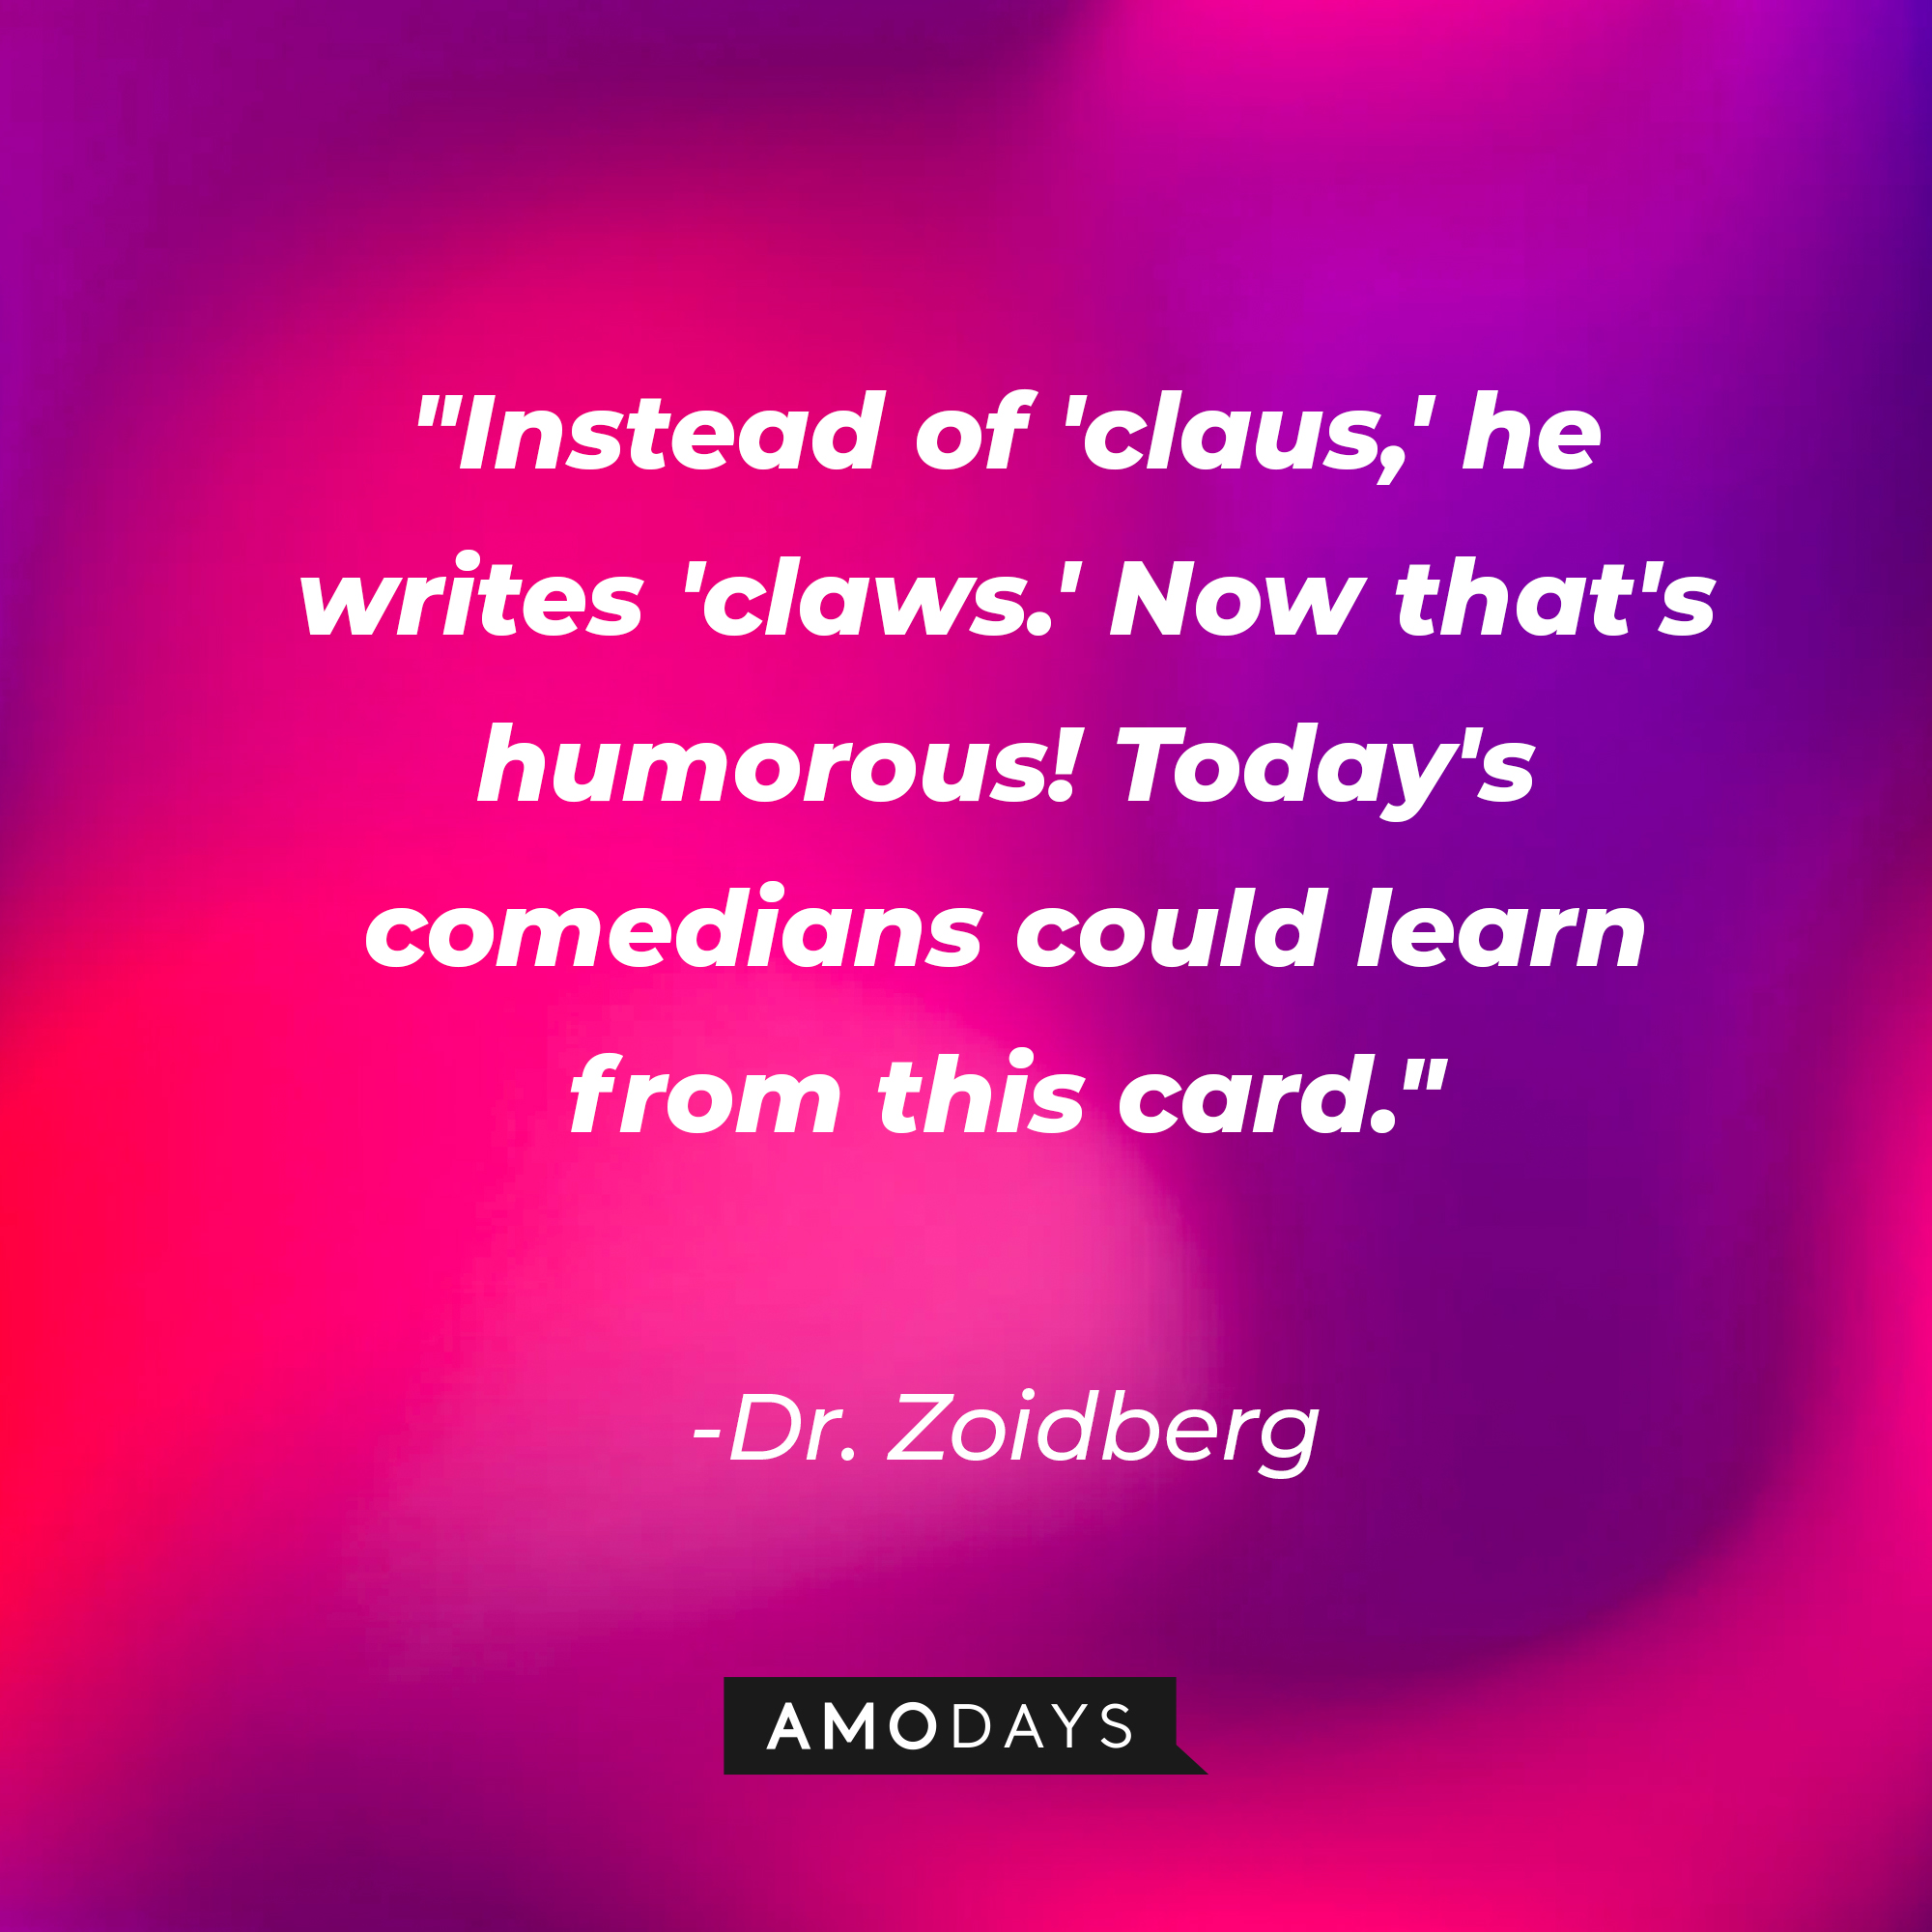 Dr. Zoidberg's quote: "Instead of 'claus,' he writes 'claws.' Now that's humorous! Today's comedians could learn from this card." | Source: AmoDays